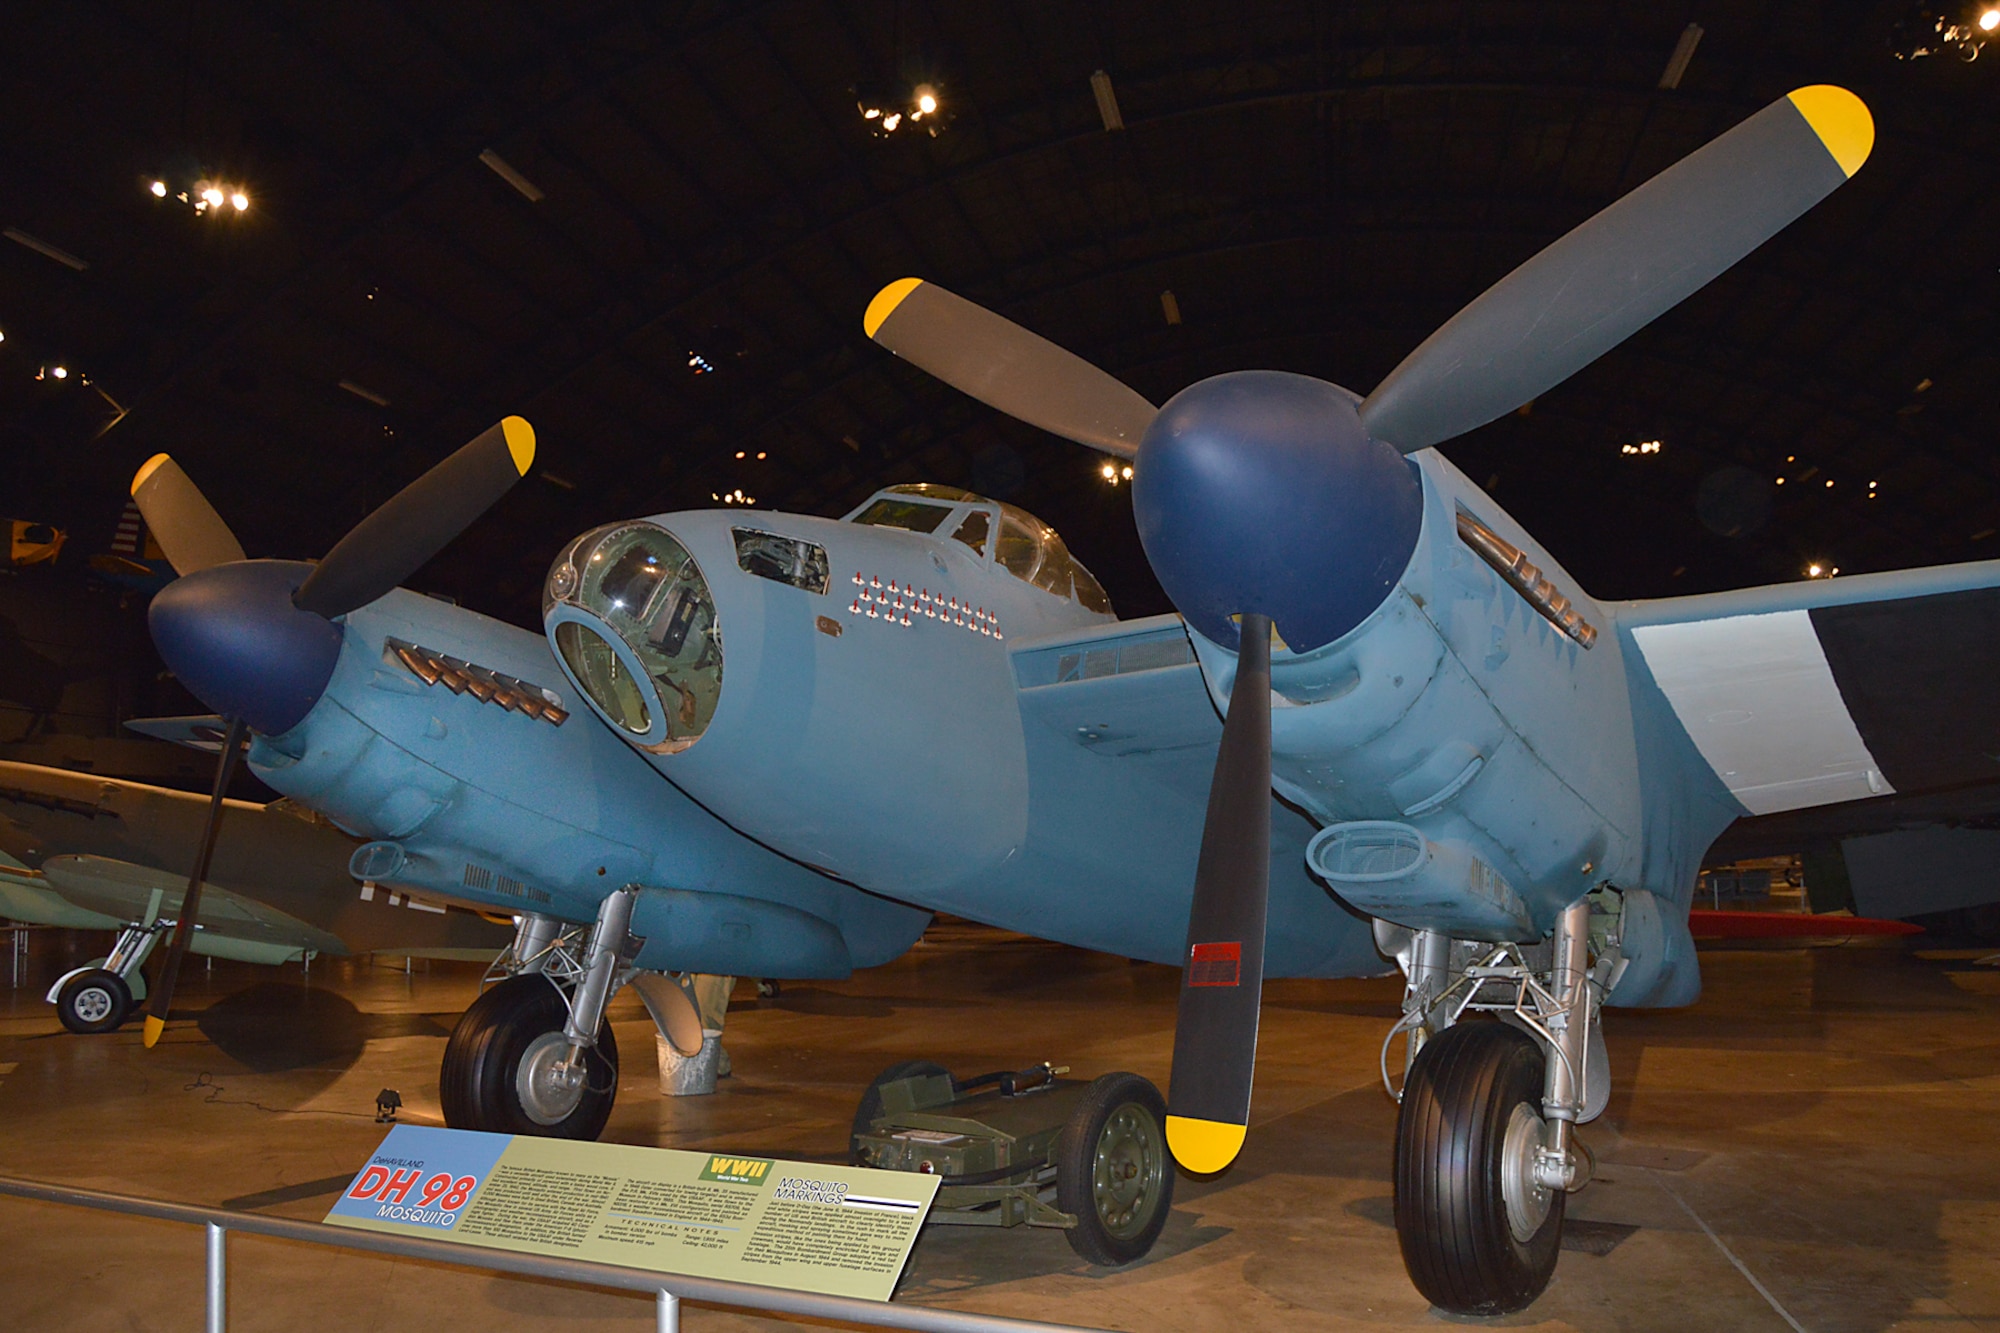 DAYTON, Ohio -- De Havilland DH 98 Mosquito in the World War II Gallery at the National Museum of the United States Air Force. (U.S. Air Force photo)
